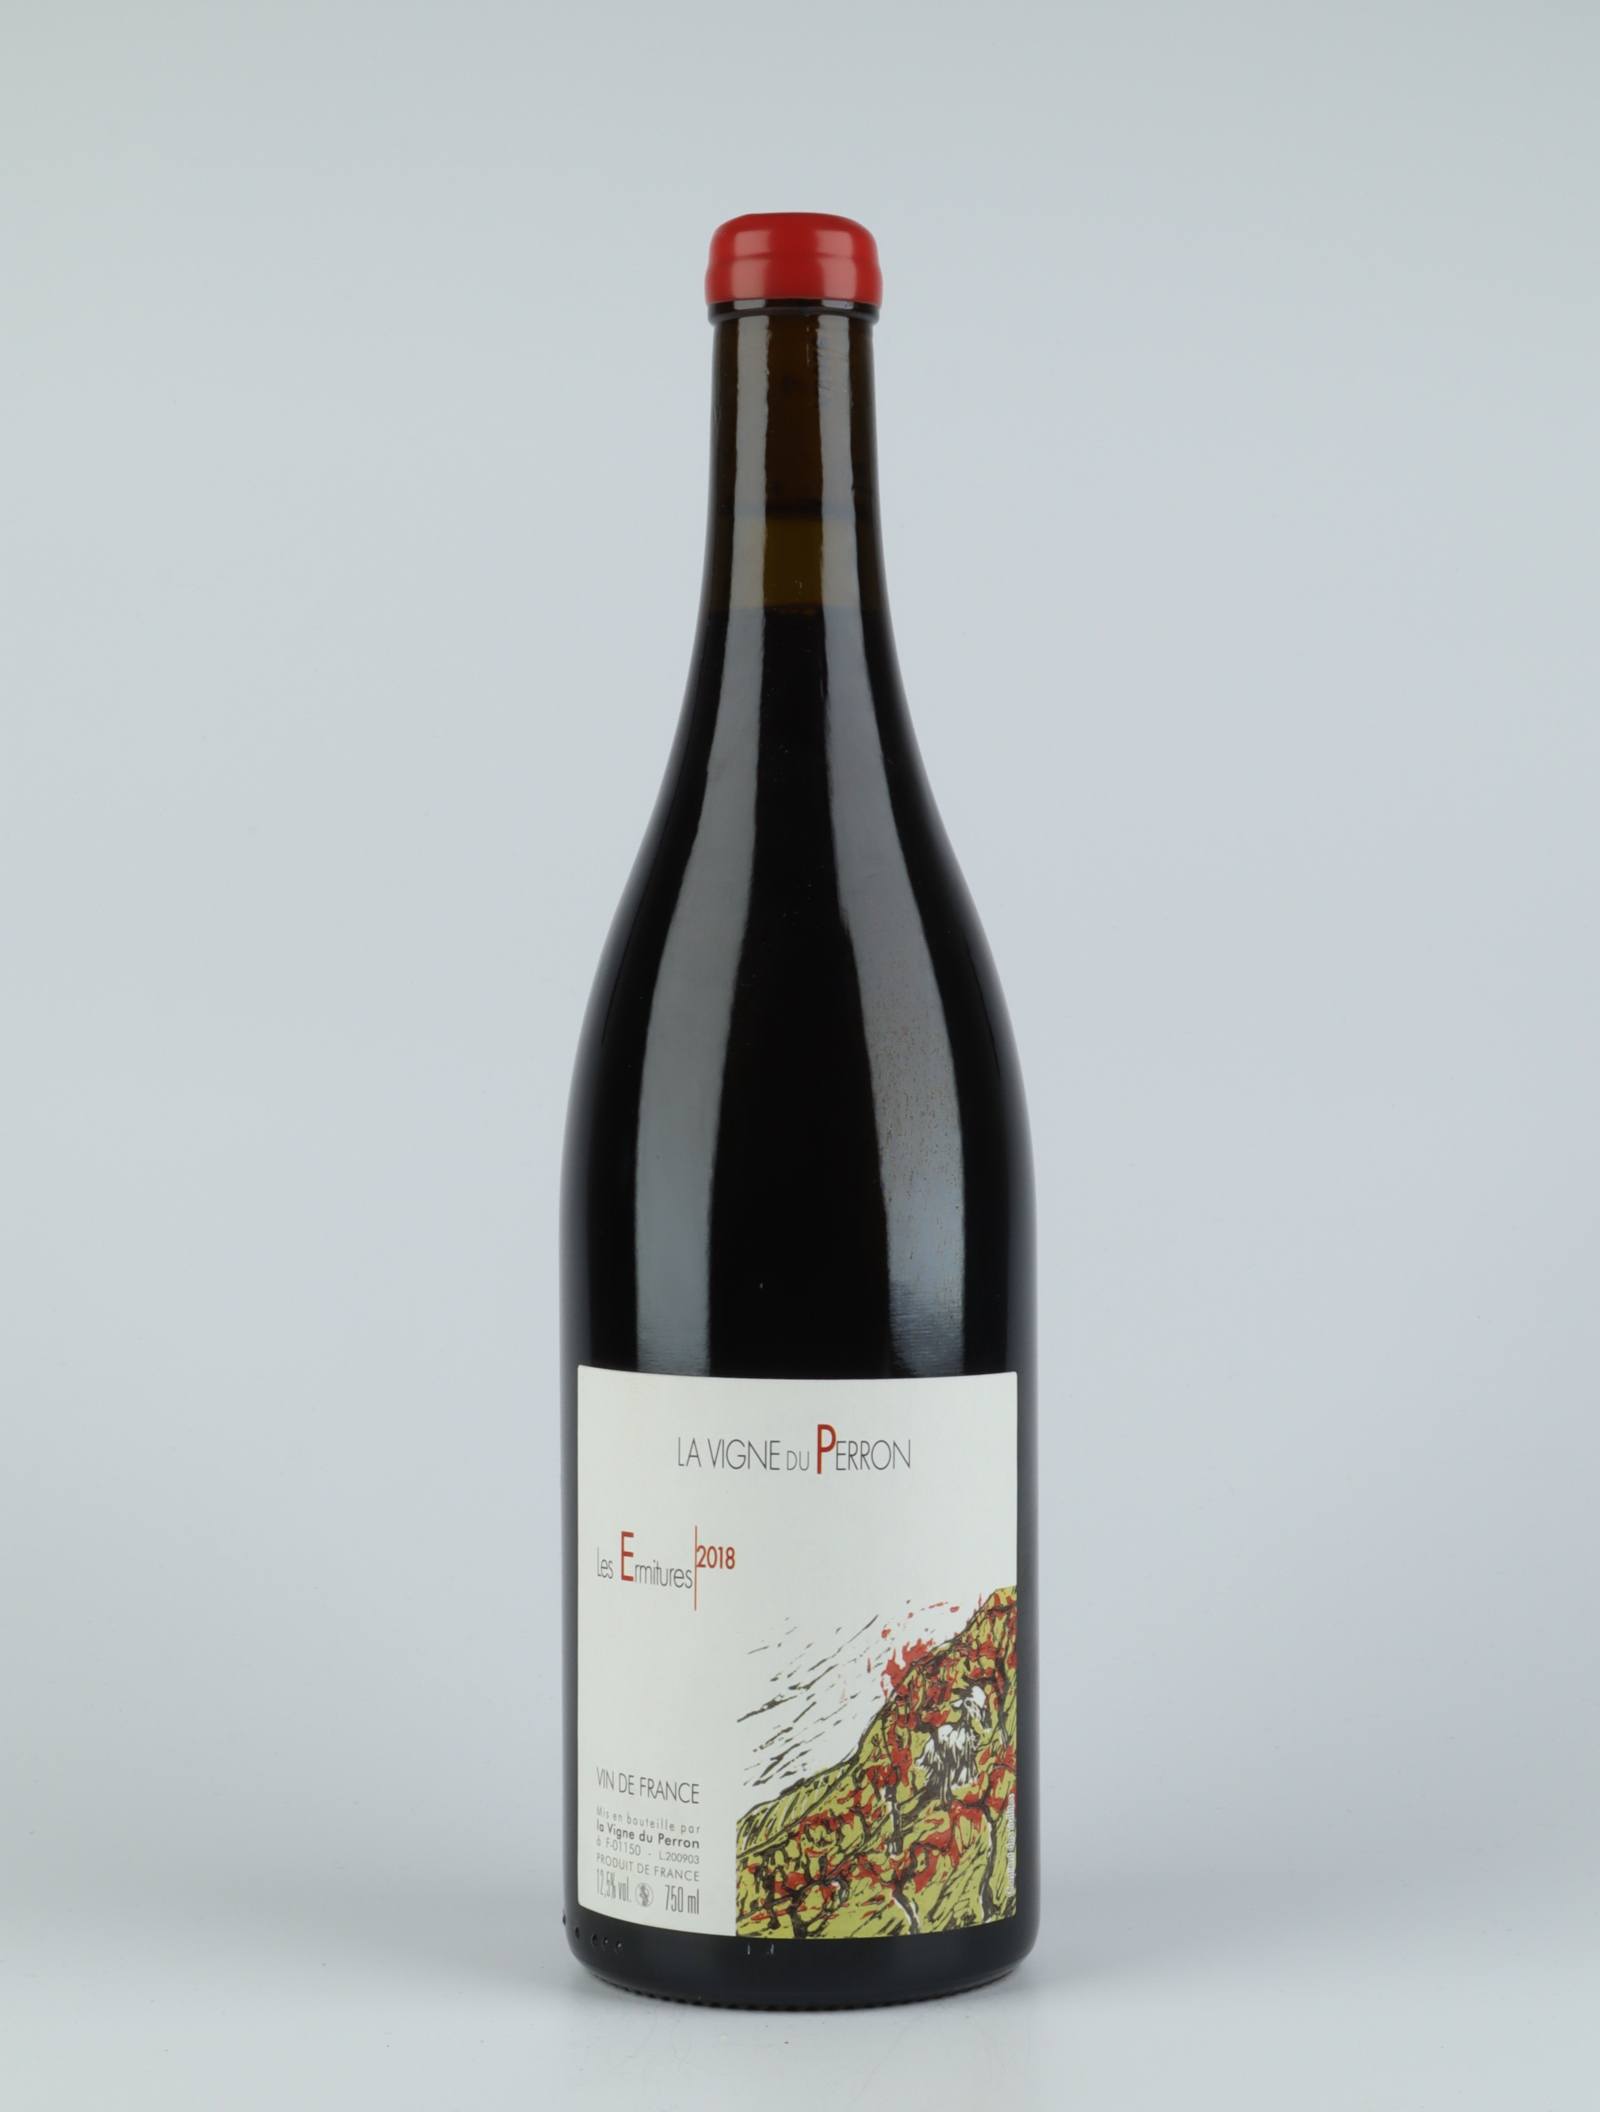 A bottle 2018 Ermitures Red wine from Domaine du Perron, Bugey in France